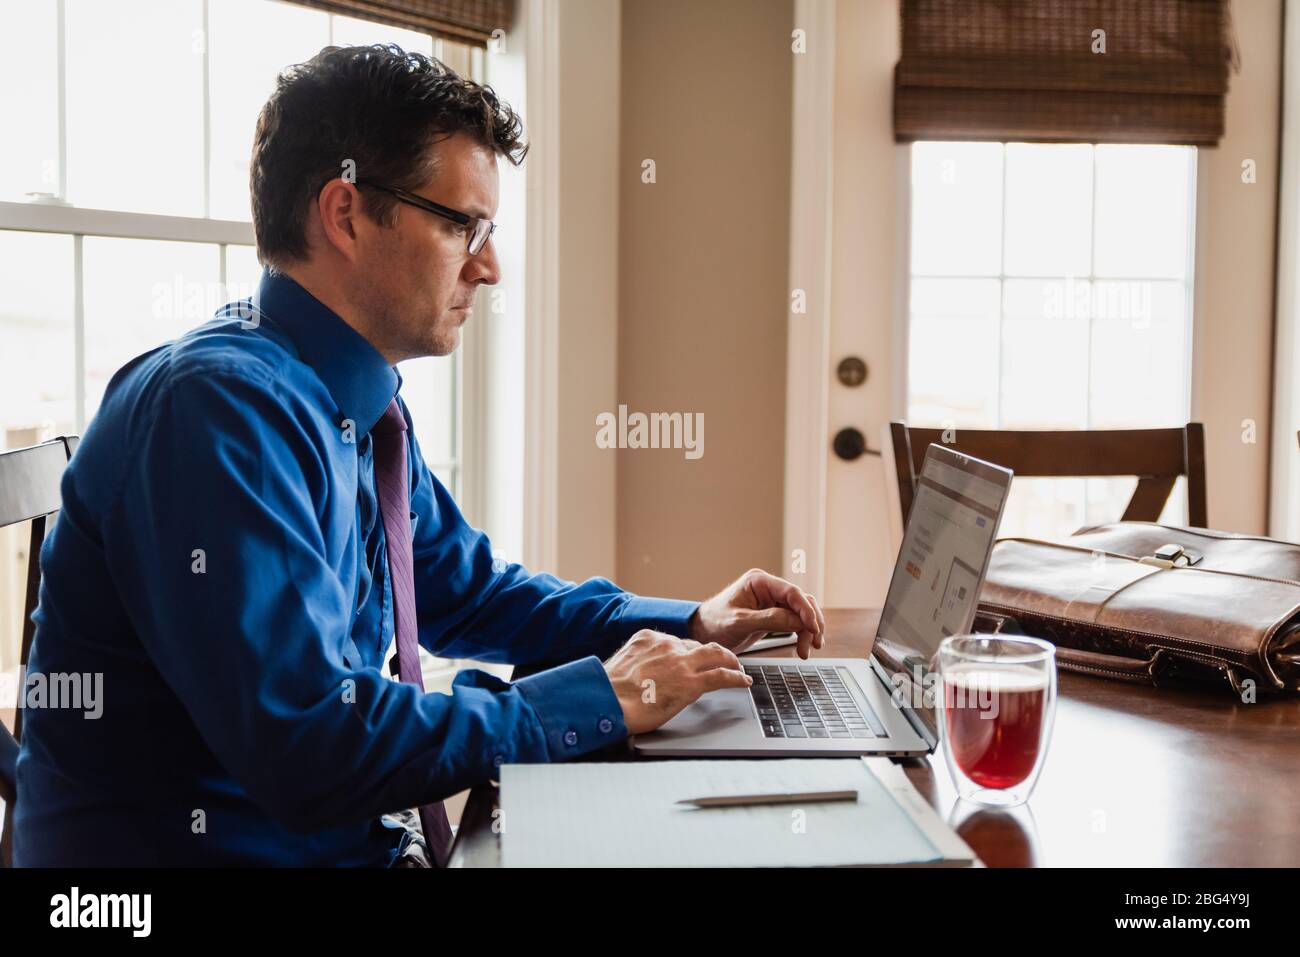 Man in shirt and tie working from home using computer at dining table. Stock Photo